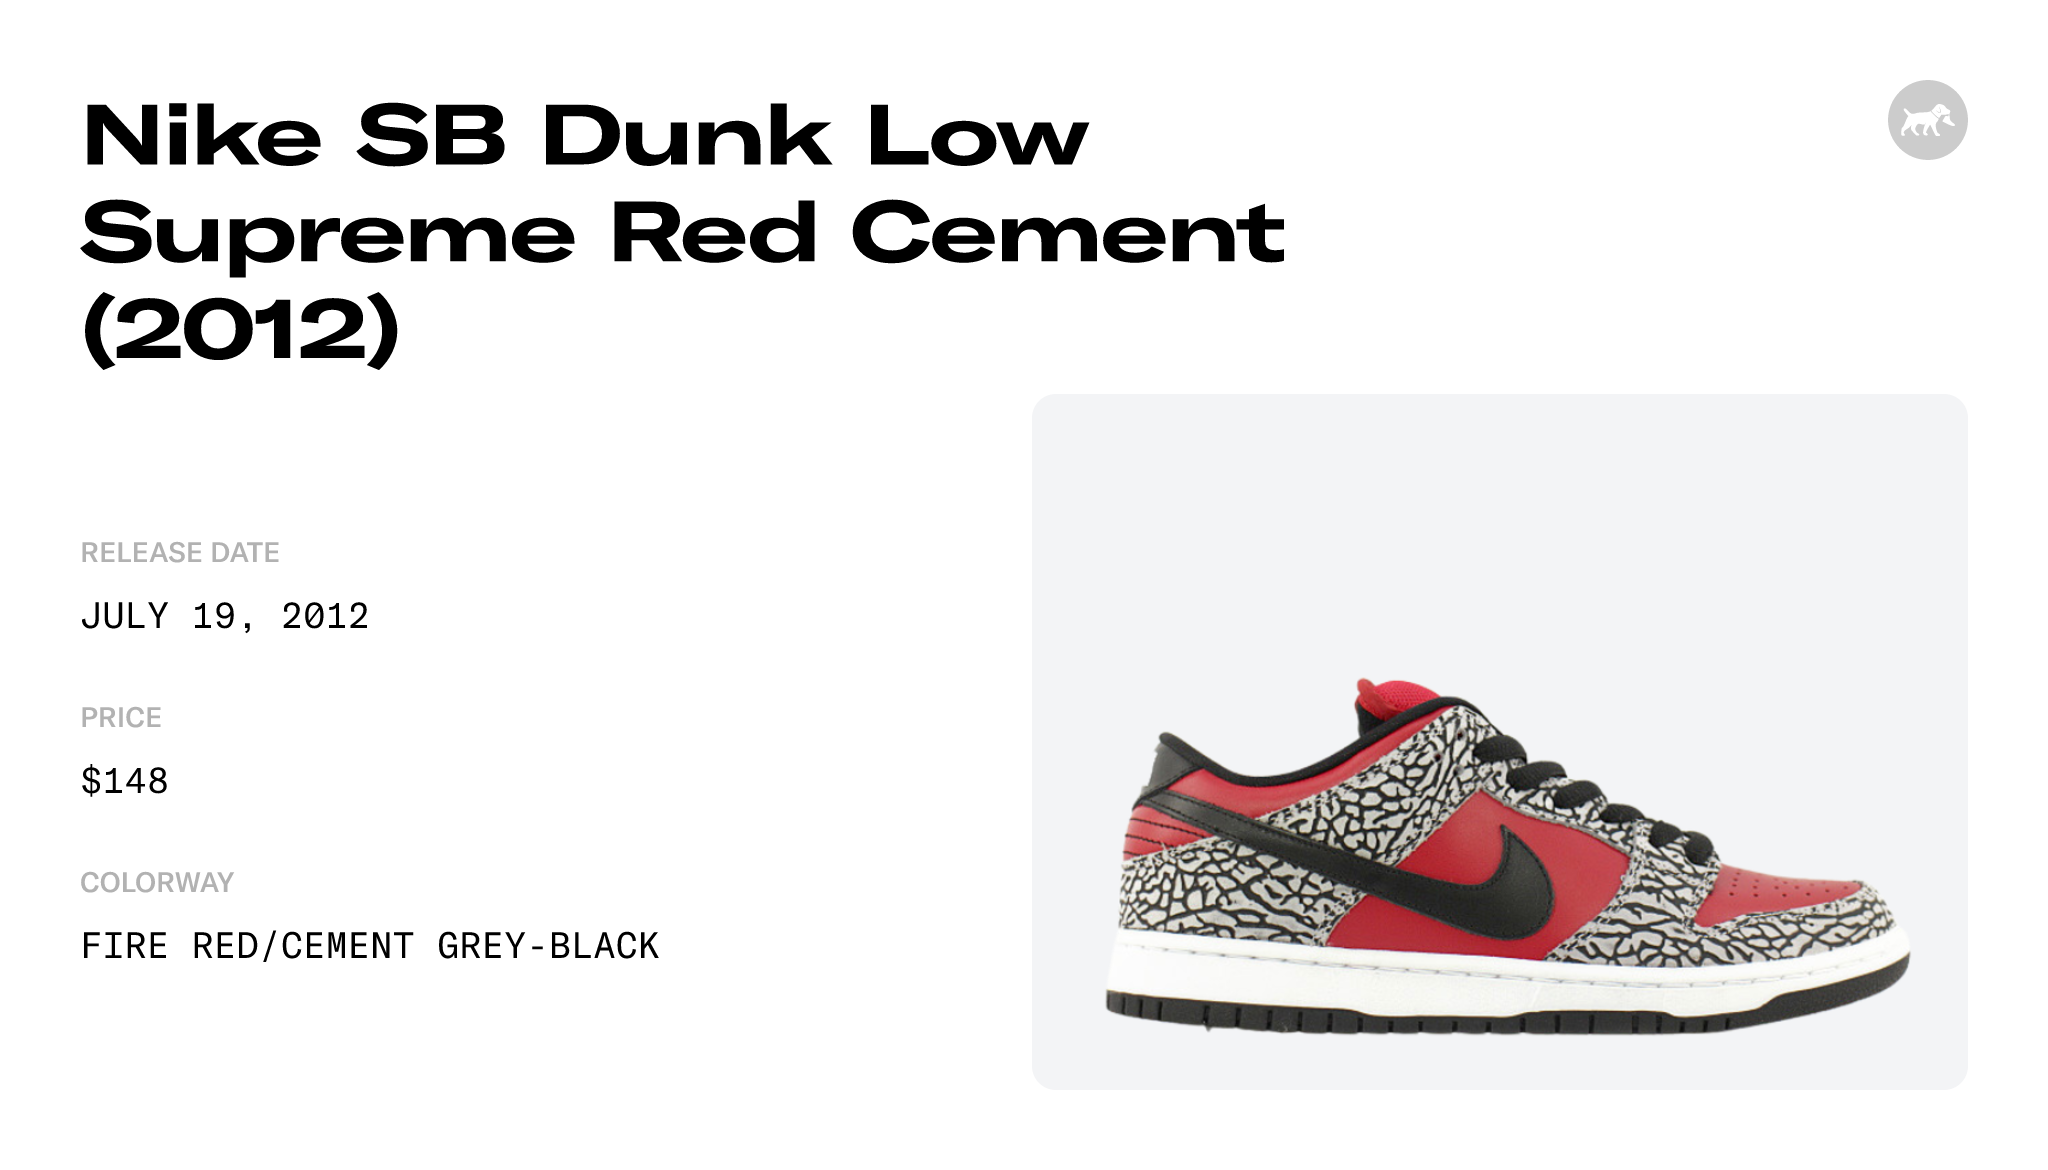 Nike SB Dunk Low Supreme Red Cement (2012) - 313170-600 Raffles